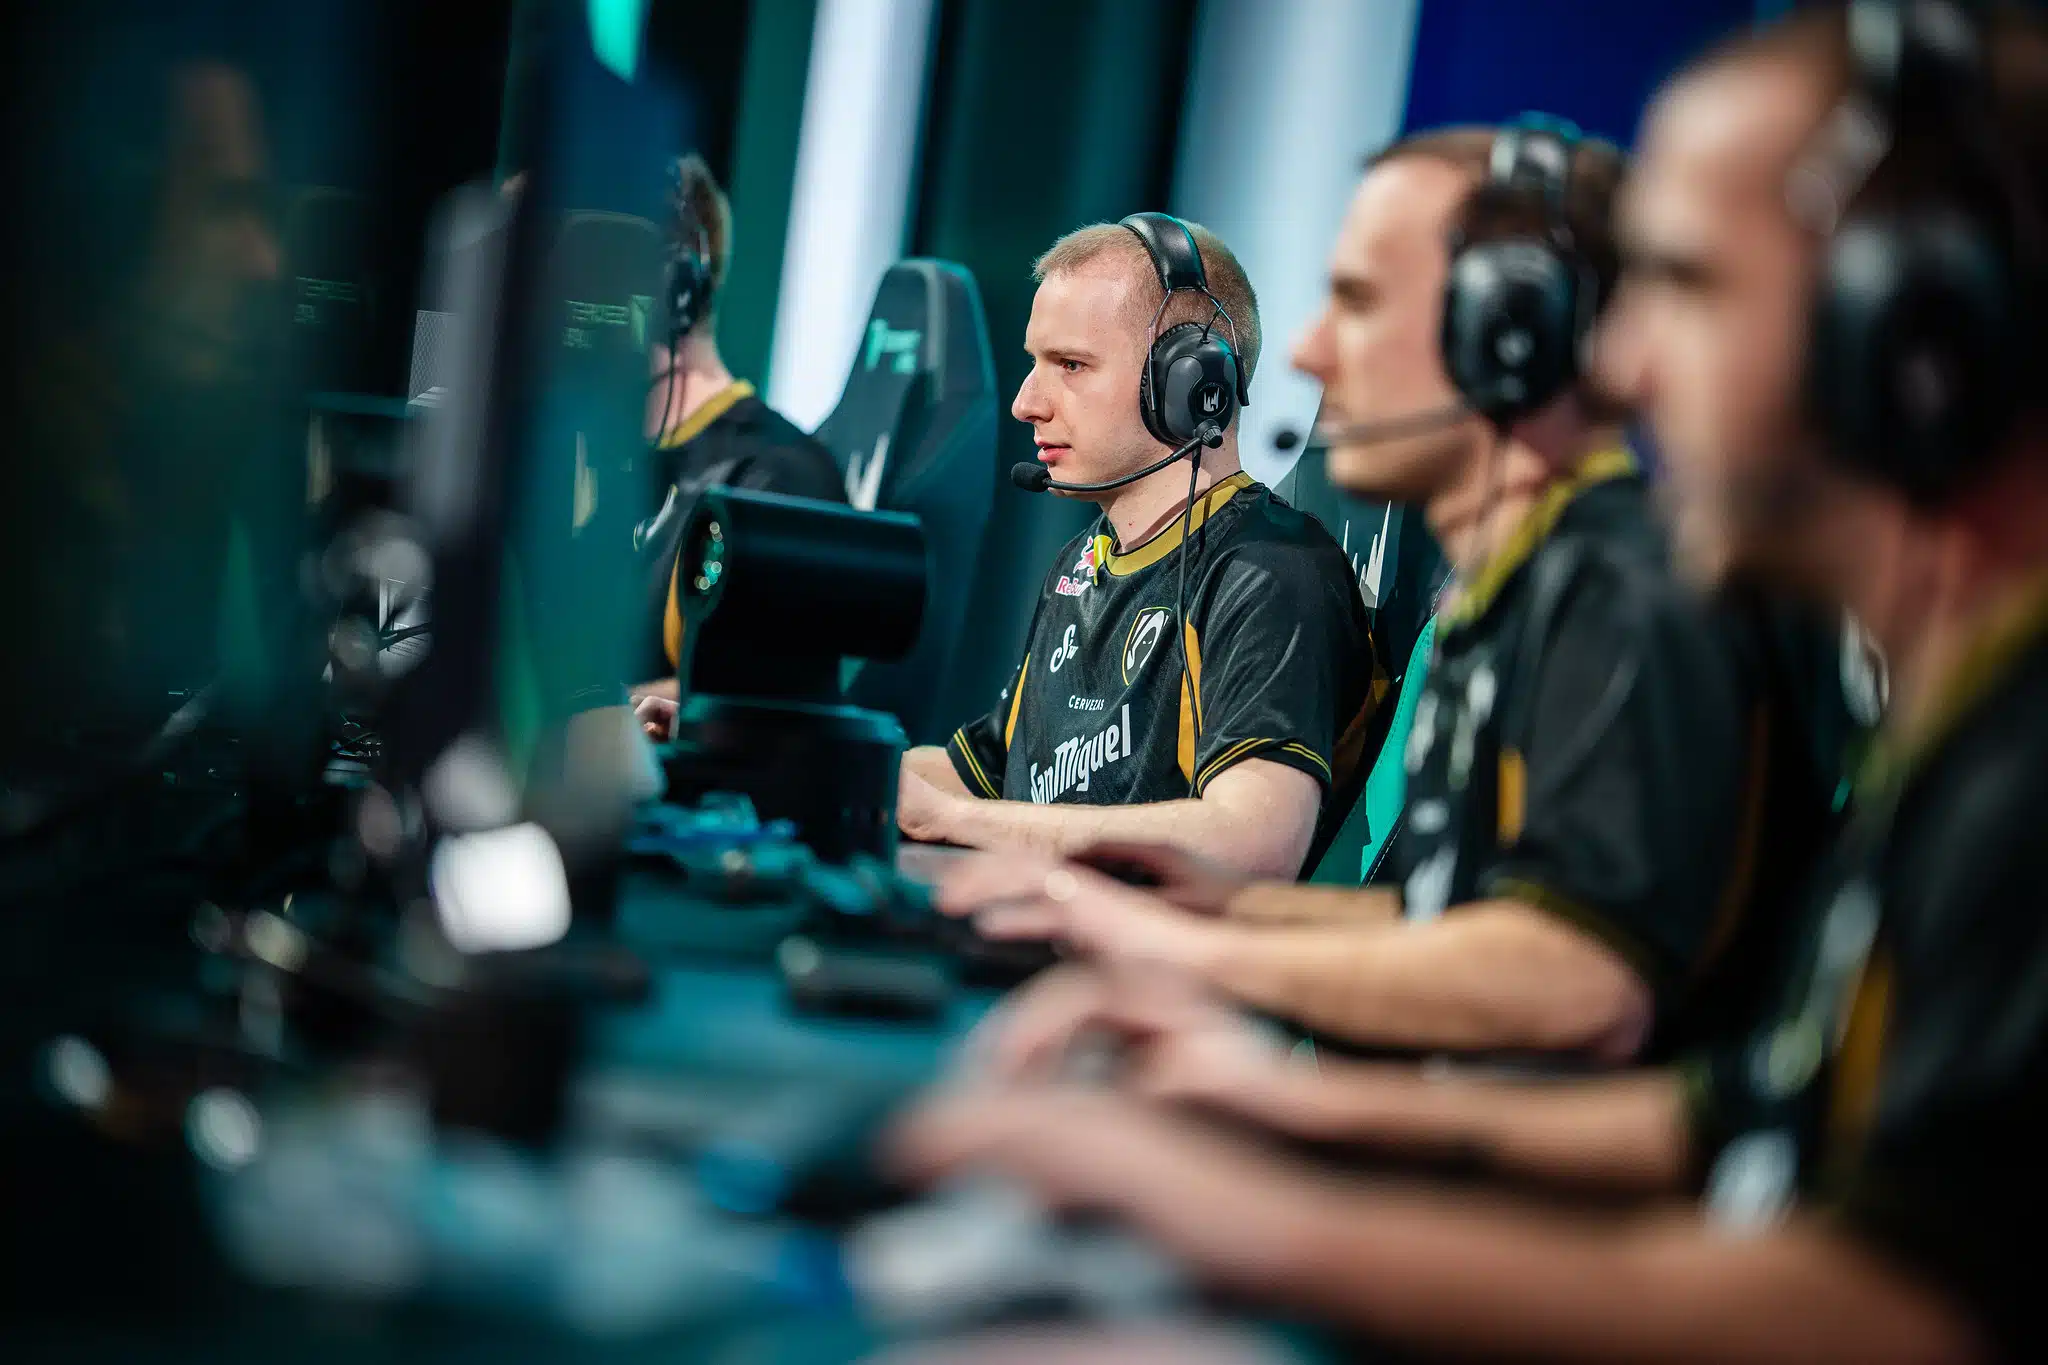 Team Heretics Jankos during a game in the Riot Games Arena in Berlin (Photo by Wojciech Wandzel/Riot Games)